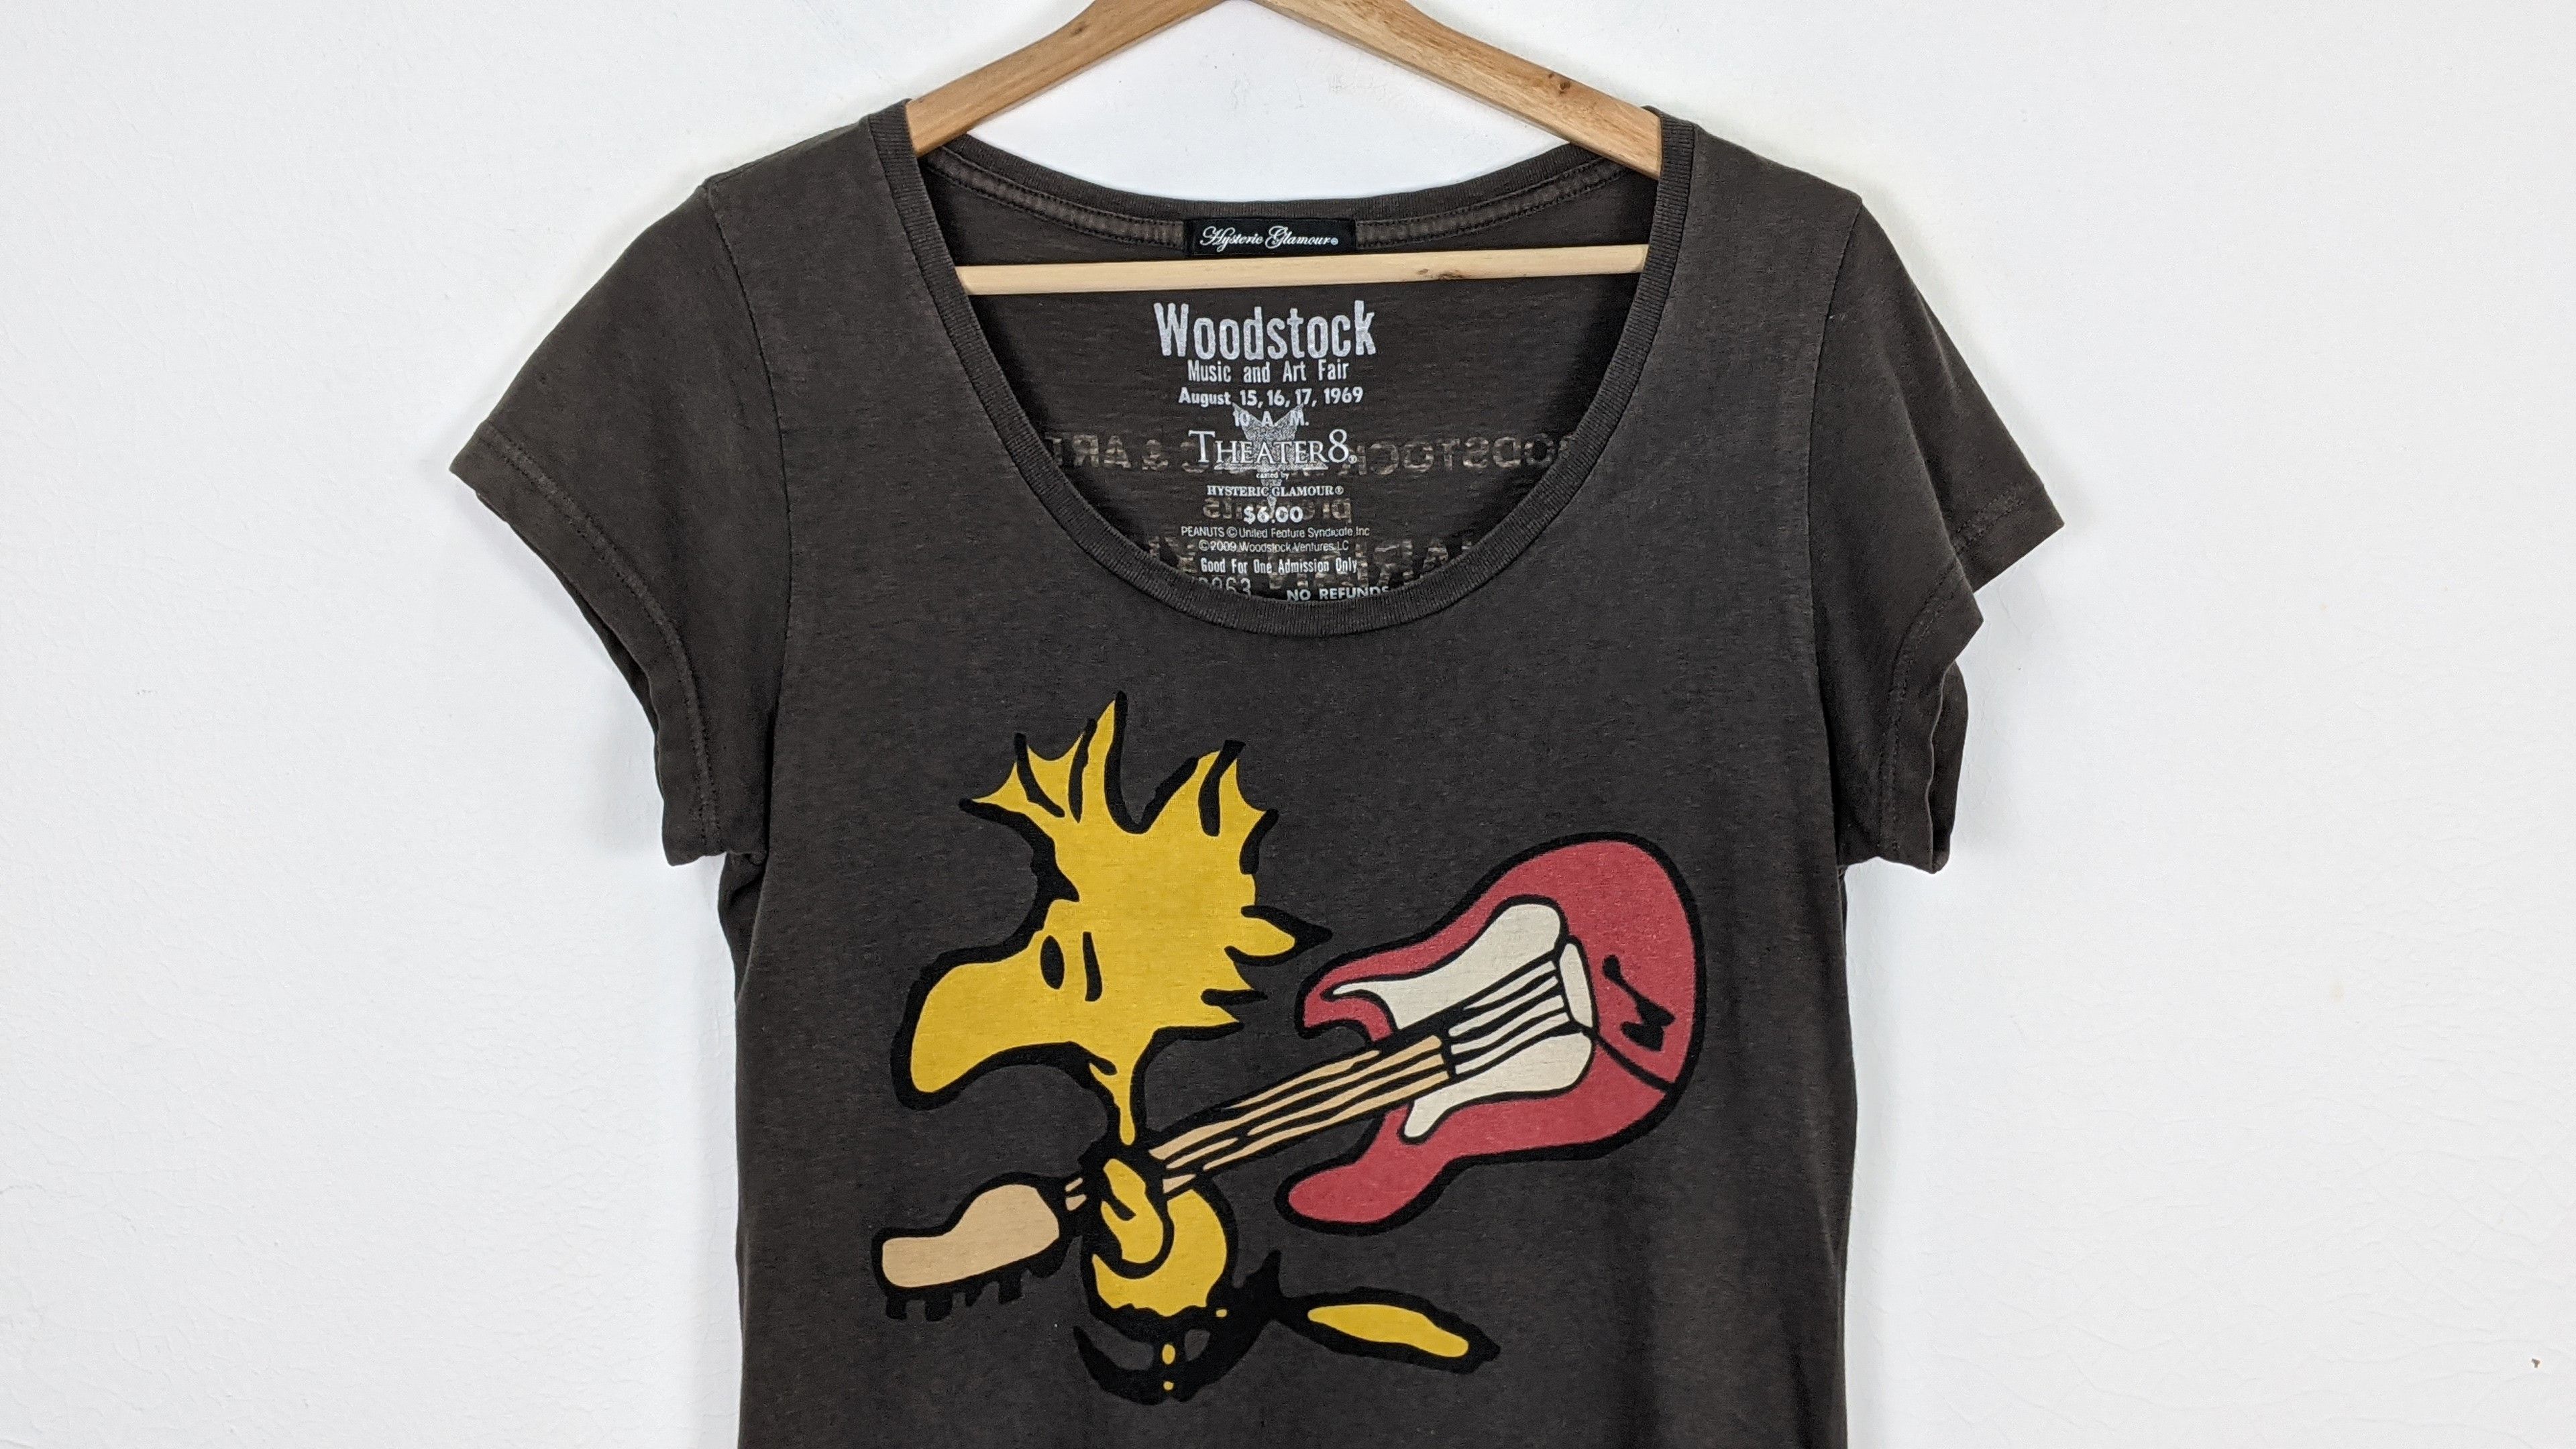 Hysteric Glamour Woodstock Peanuts Theater 8 shirt - 3